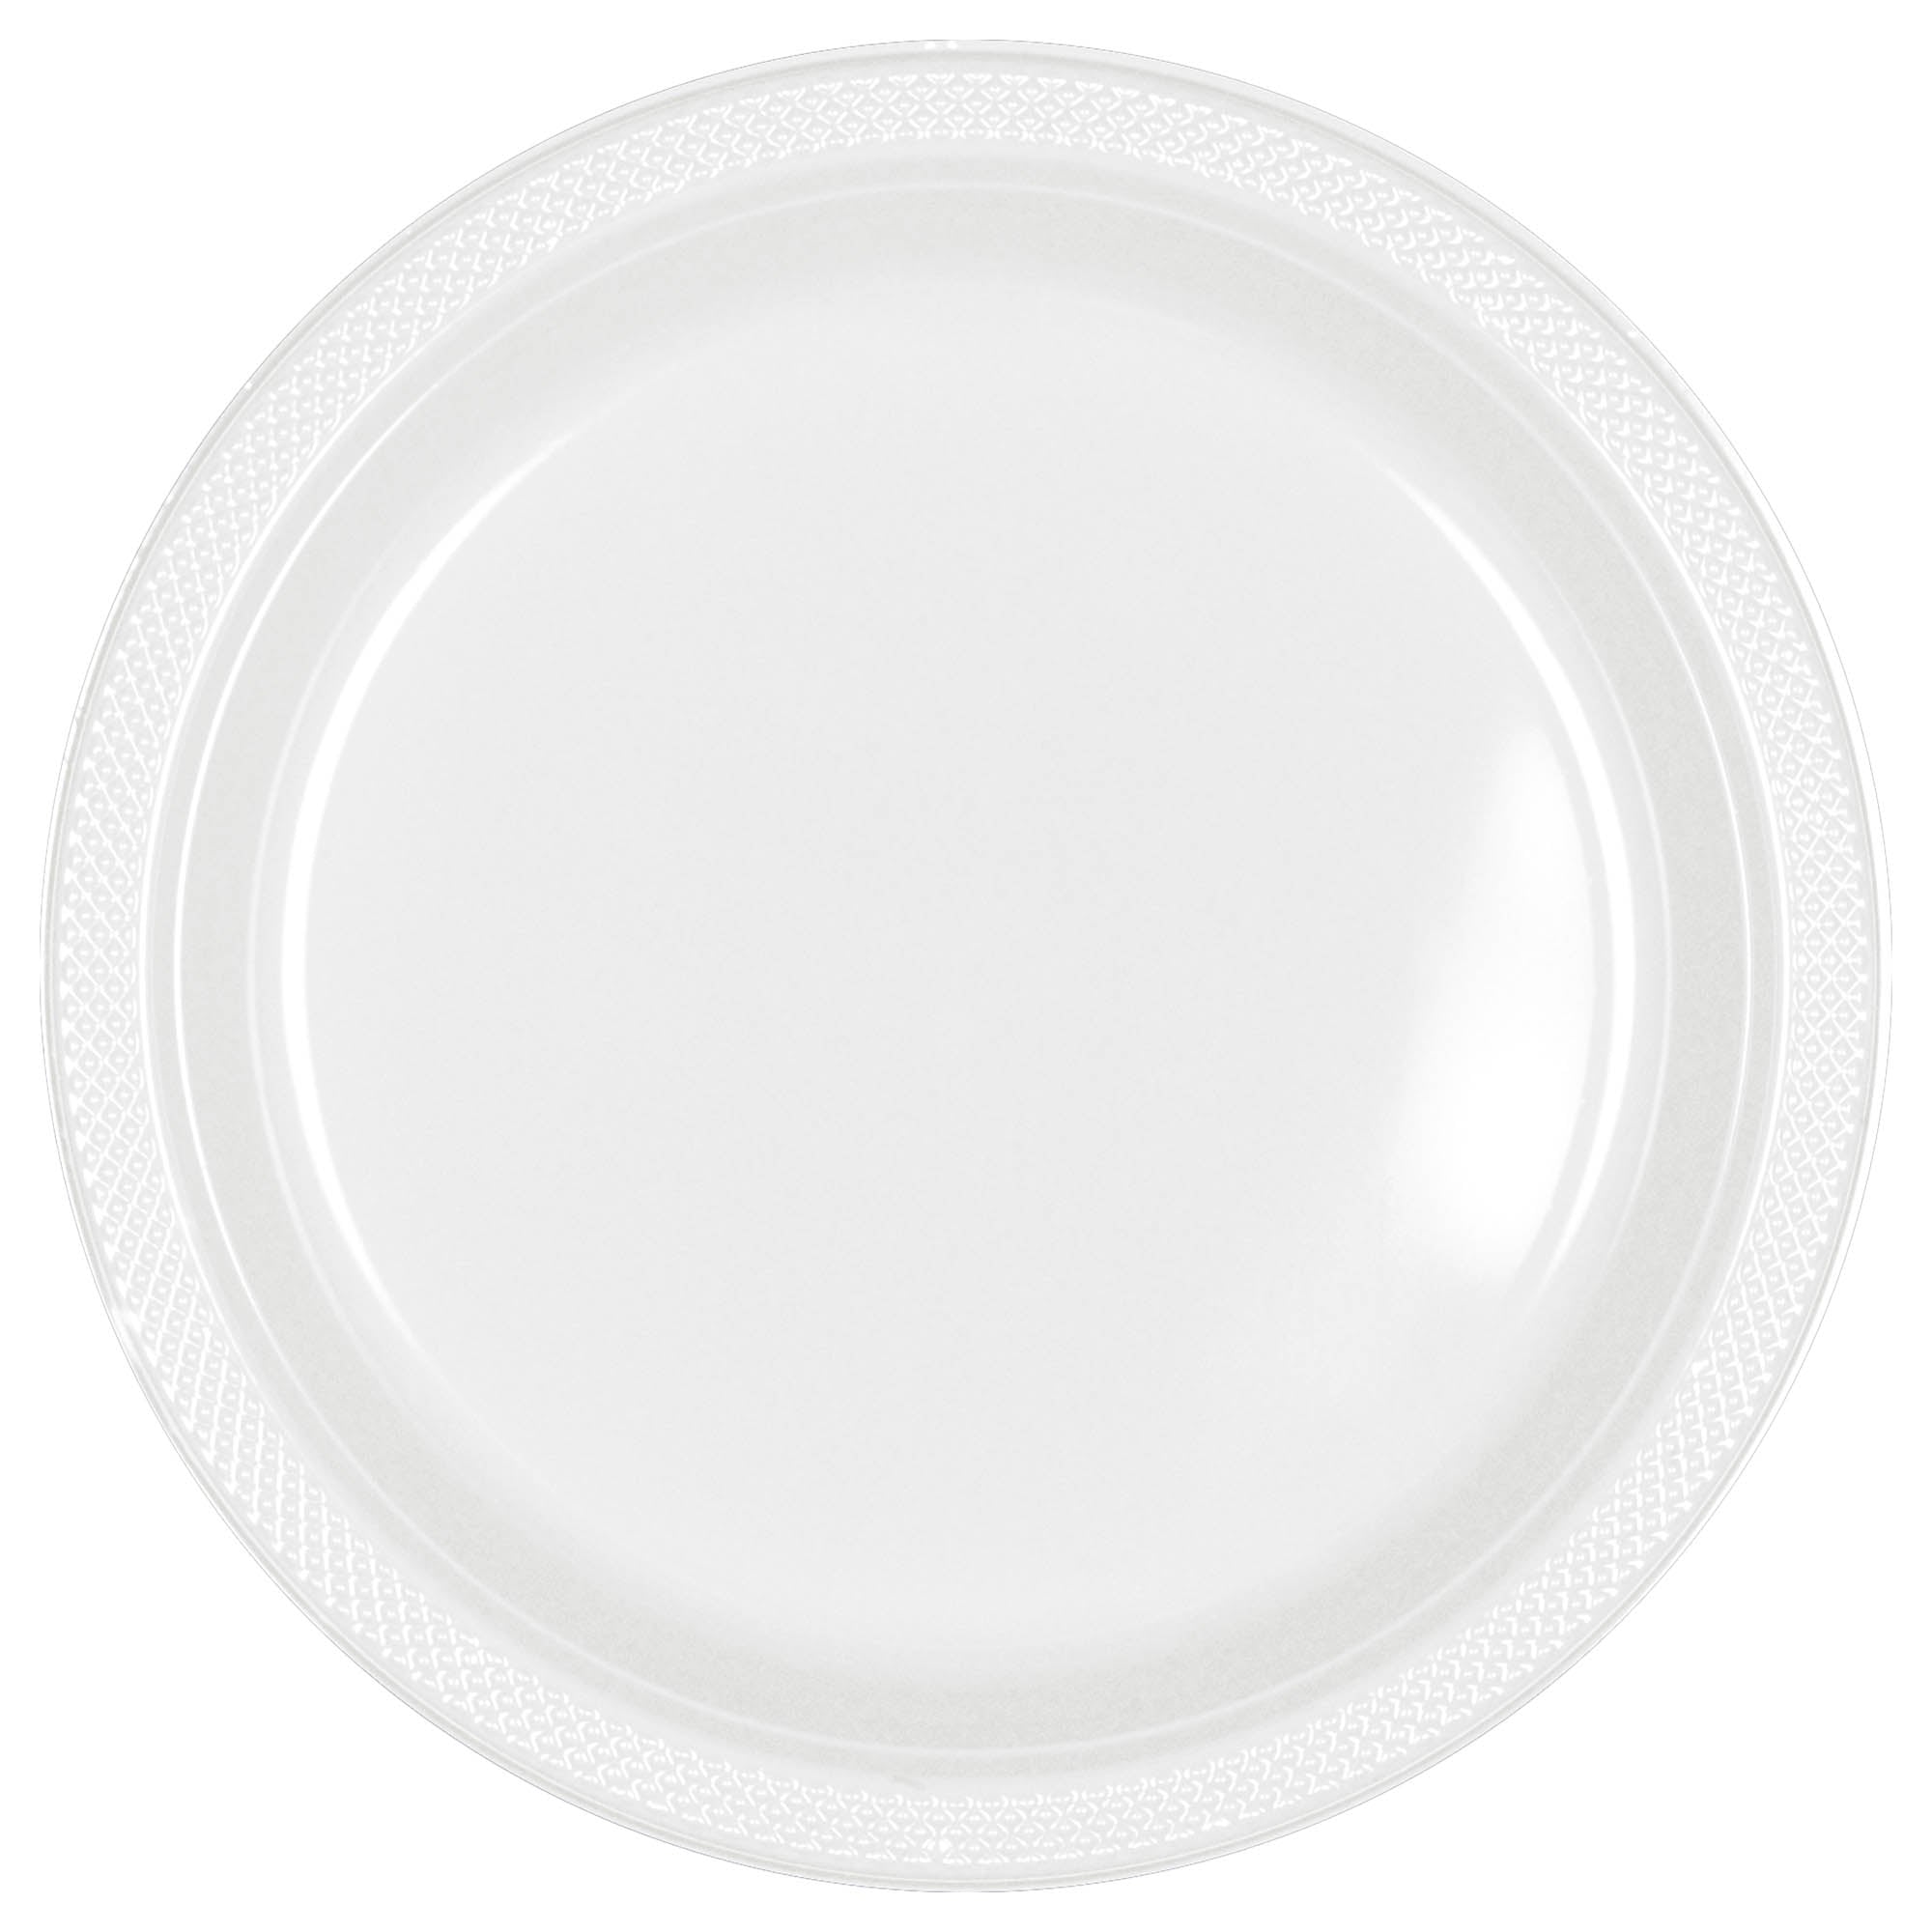 Round Plastic Plates  Frosty White  20 pcs  7in